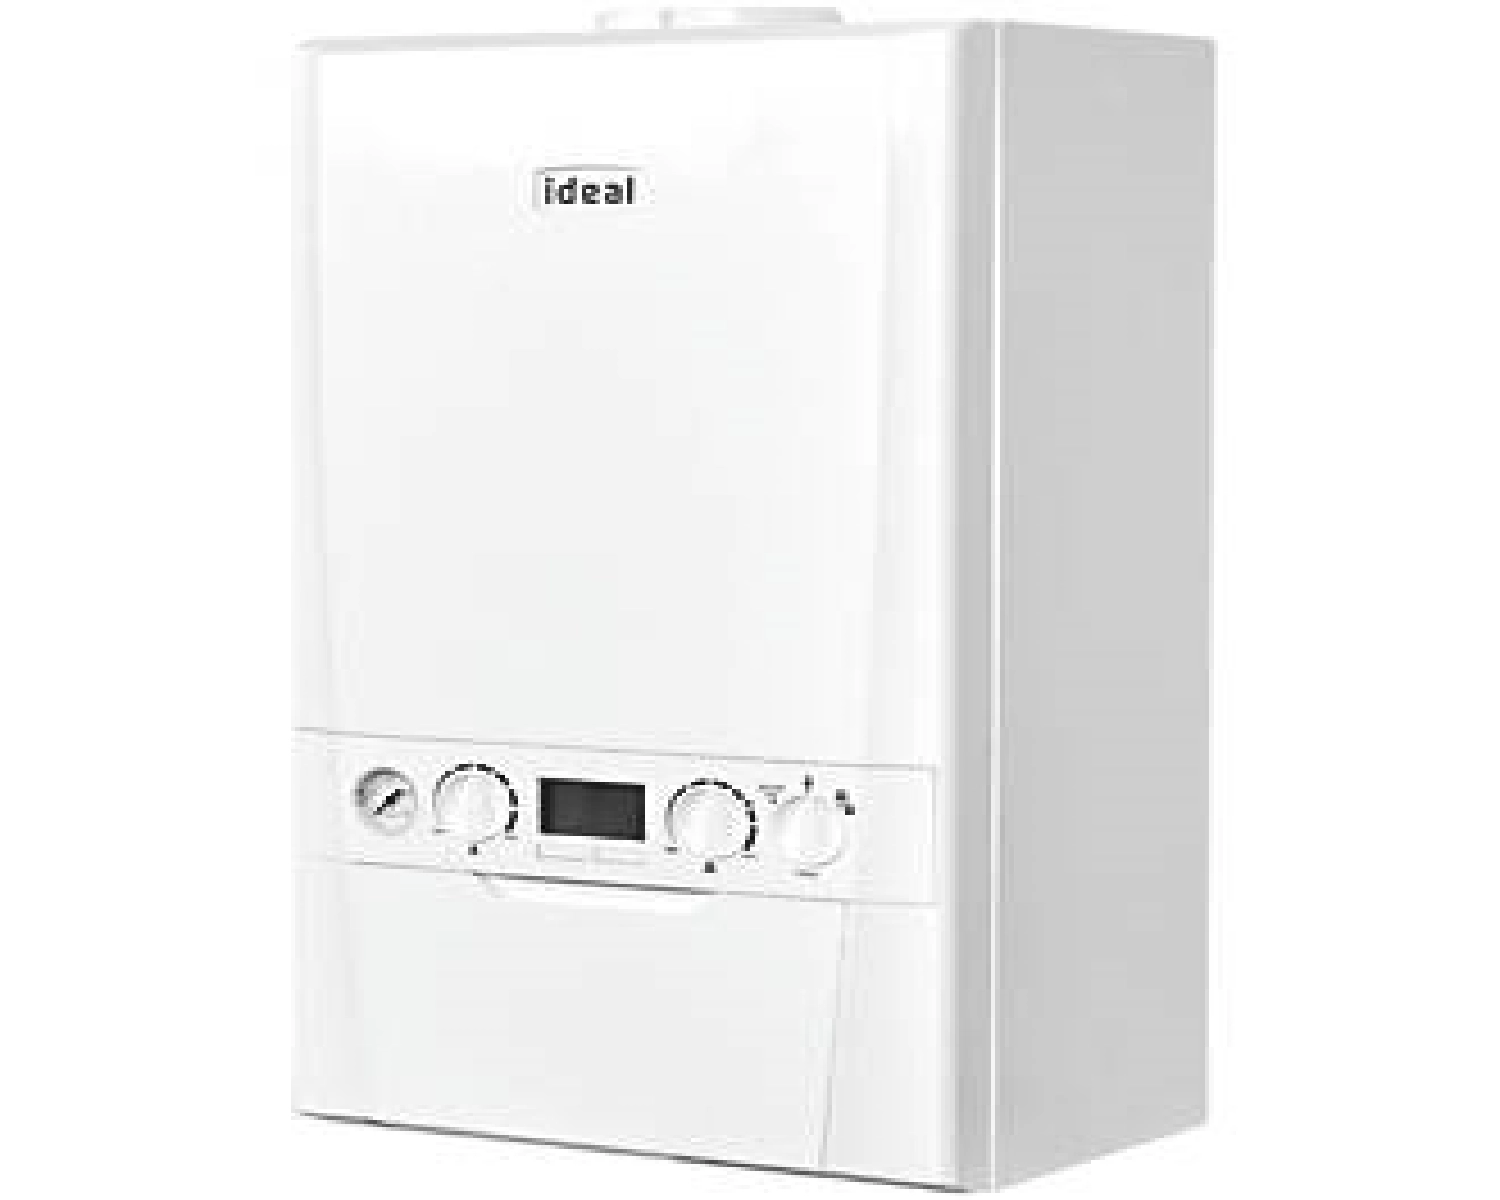 compare a ideal boiler with a baxi boiler